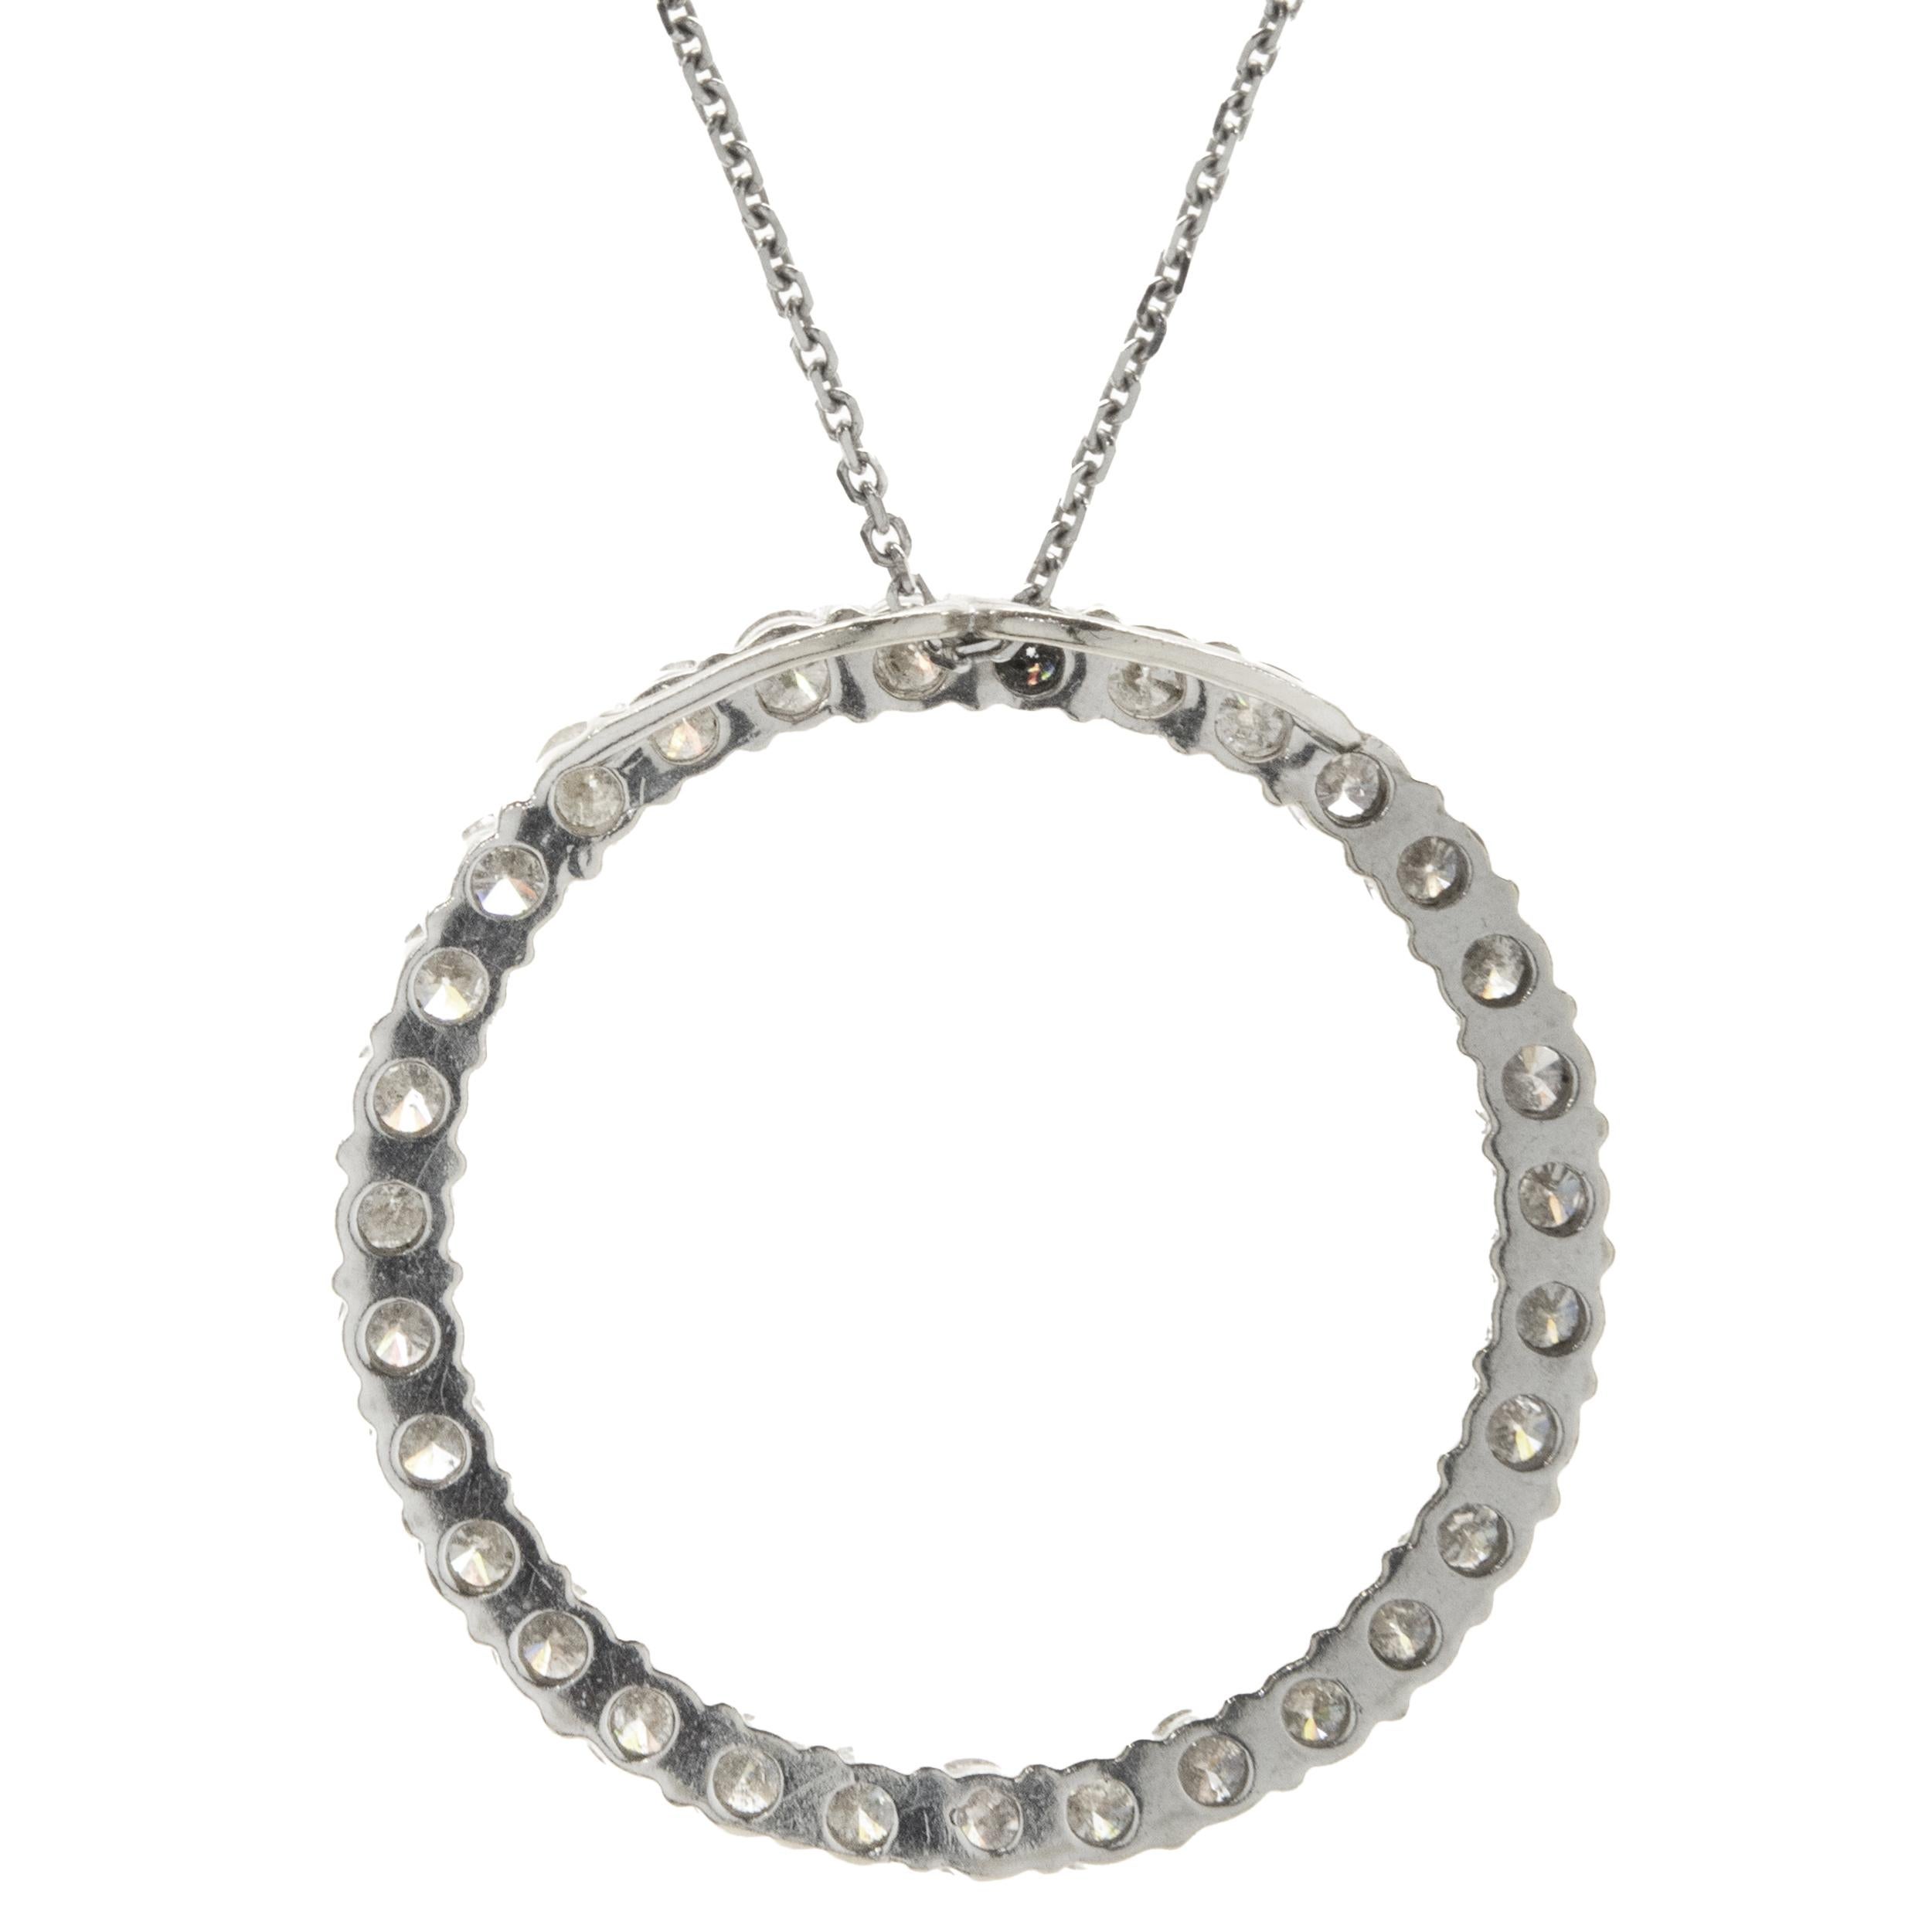 Designer: custom
Material: 14 karat white gold
Diamonds: 31 round brilliant cut = 2.20cttw
Color: G
Clarity: SI1
Dimensions: This necklace measures 18 inches in length
Weight: 6.80 grams